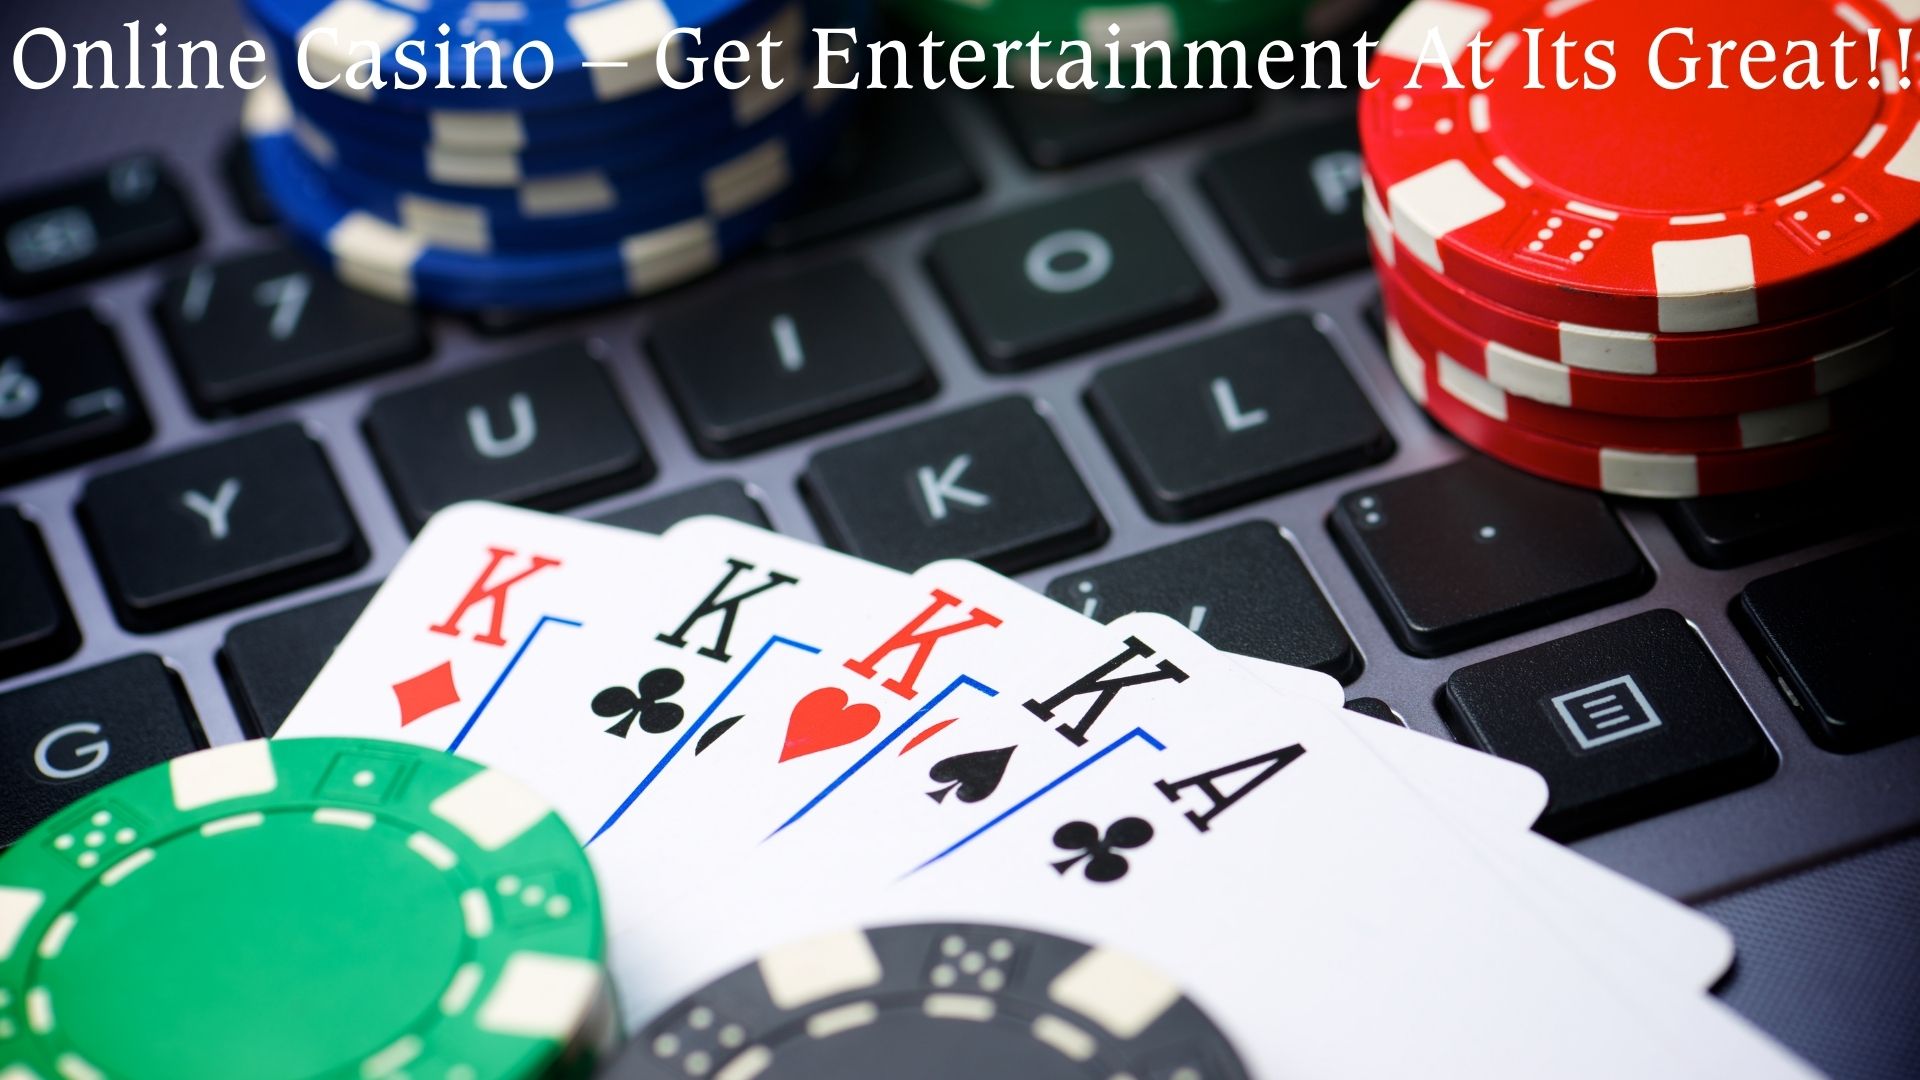 Online Casino – Get Entertainment At Its Great!!